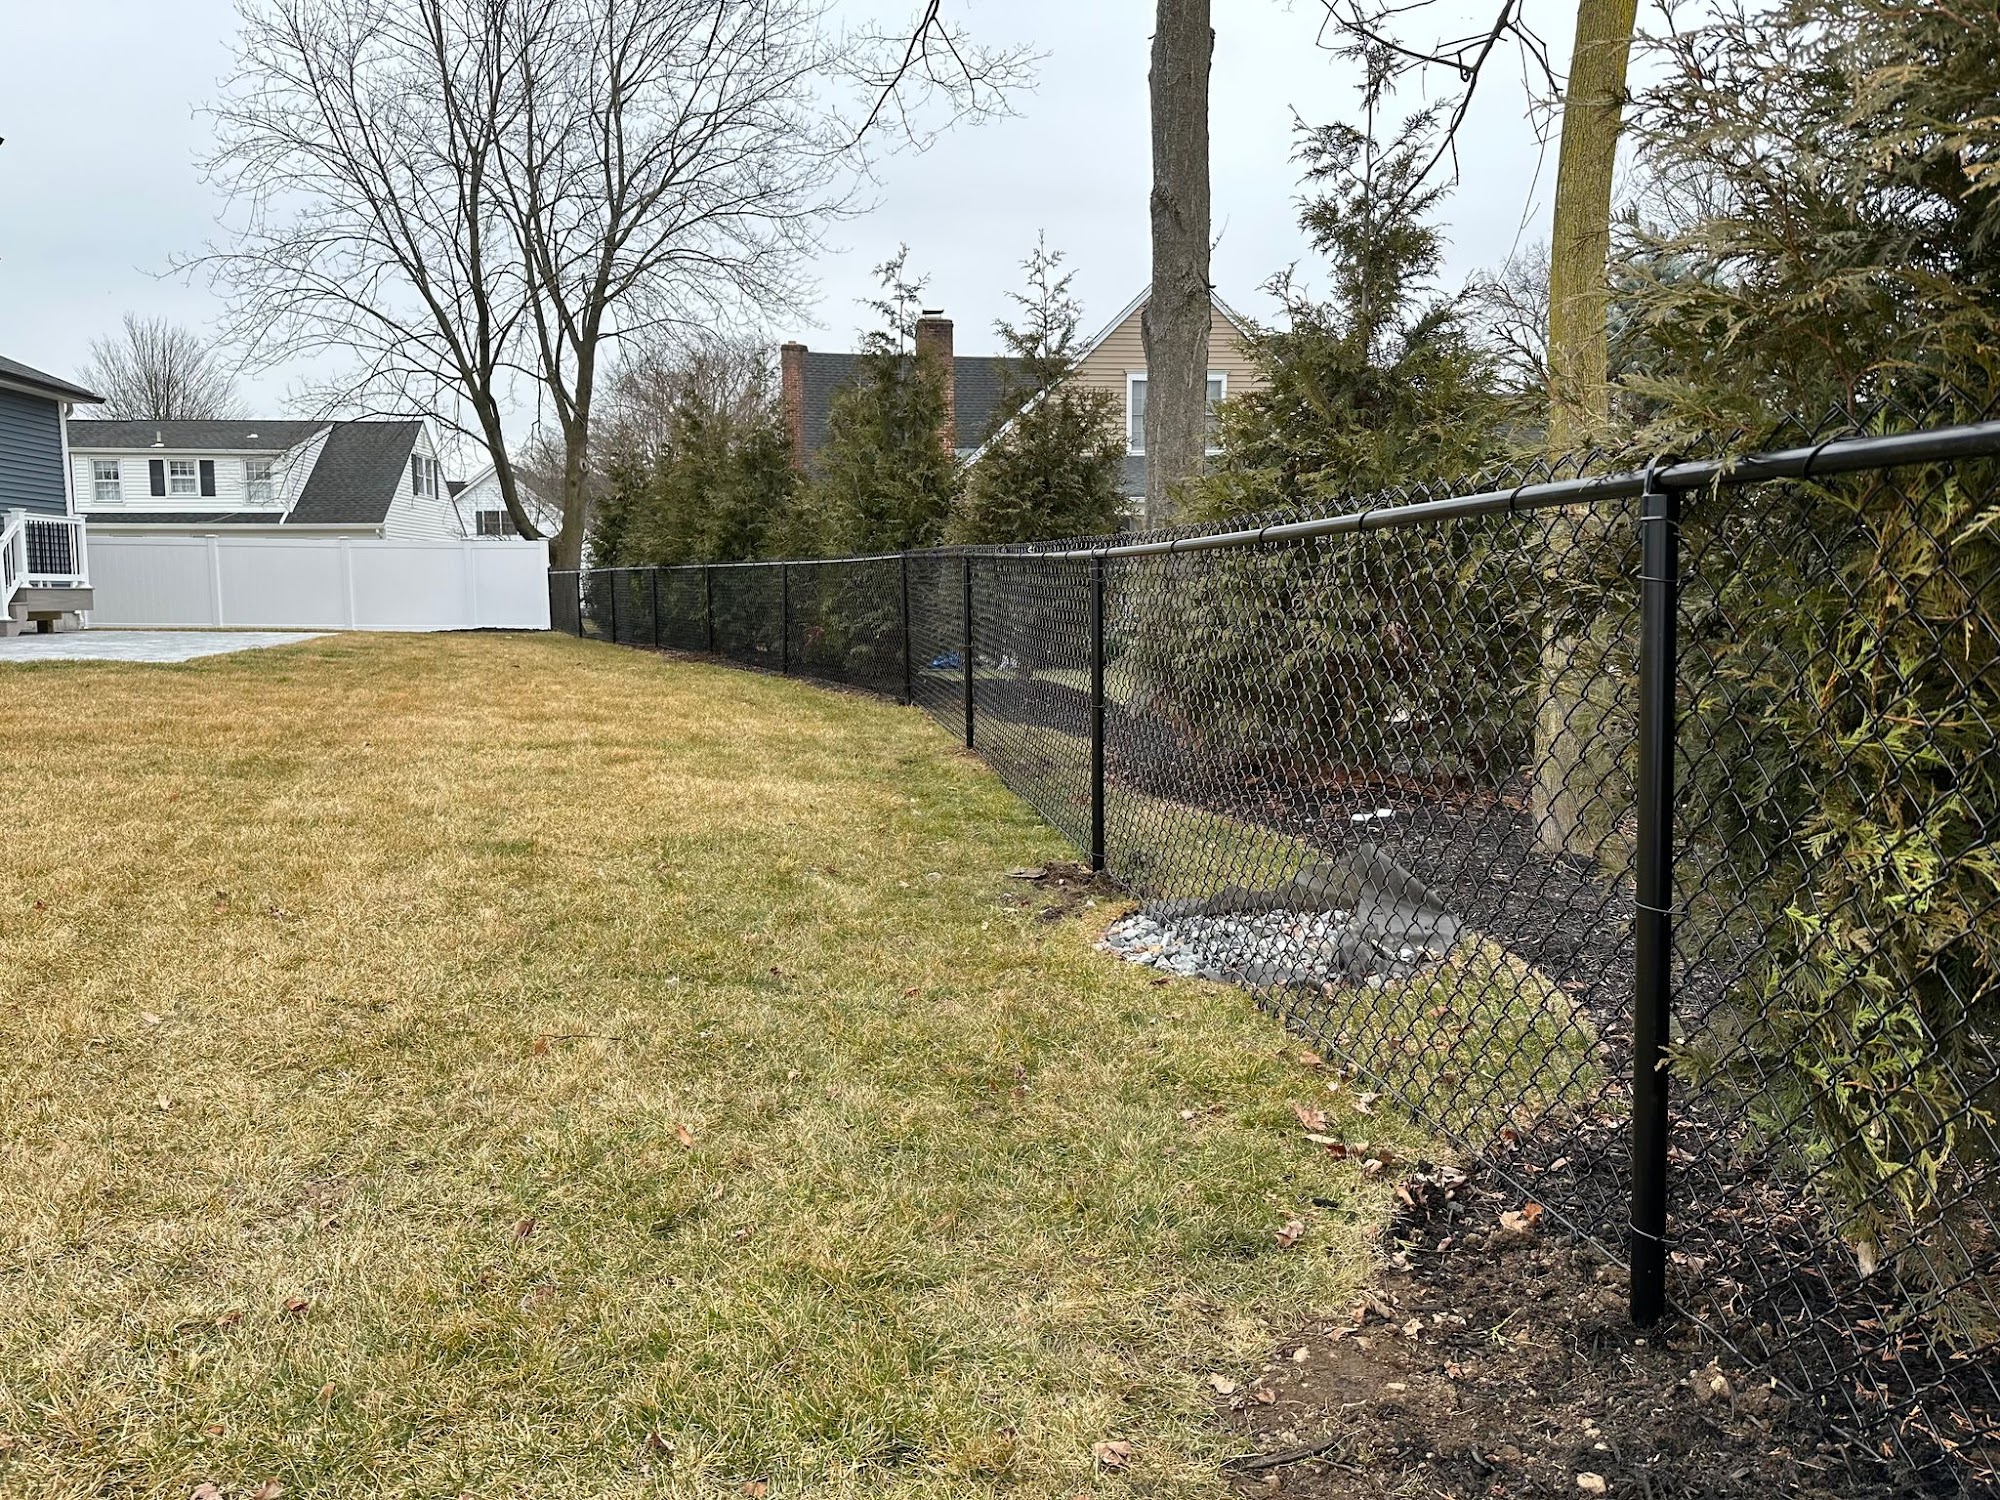 Jan Fence 4 Industrial Rd, Pequannock New Jersey 07440